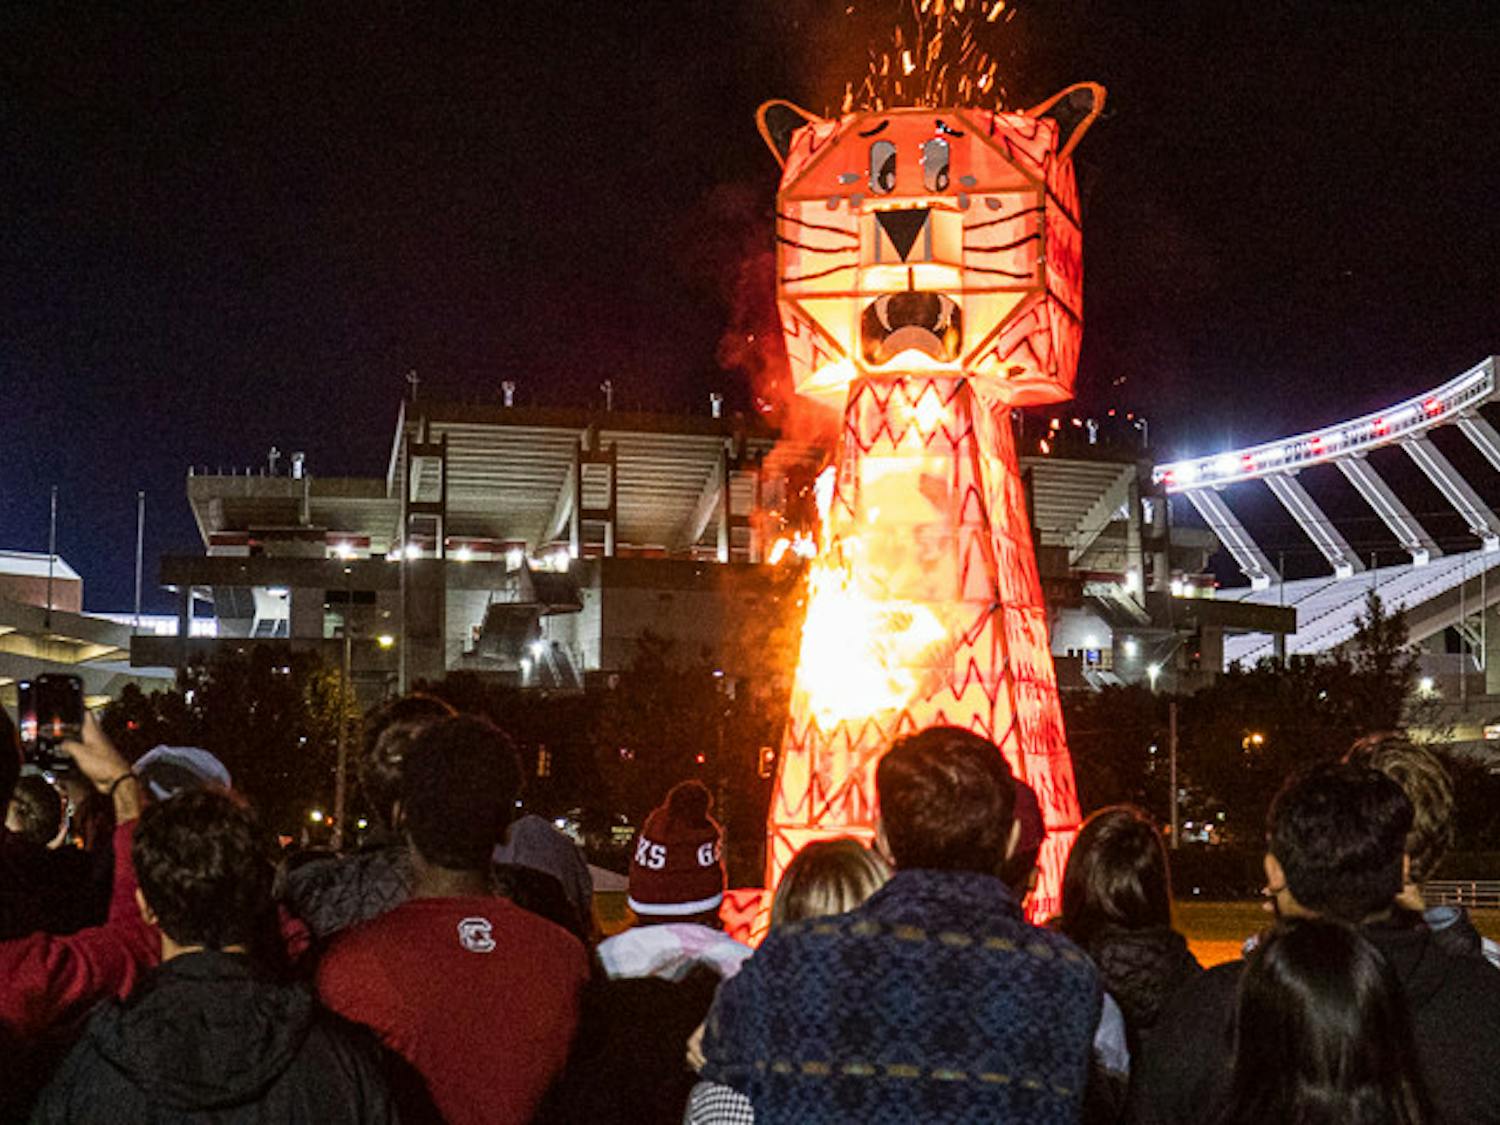 Students watch as the giant wood and steel-beam Clemson Tiger bursts into flames during the USC Tiger Burning Ceremony on Nov. 21, 2022. USC hosts this event annually during the week leading up to the South Carolina-Clemson football rival match the following Saturday. This year Clemson is hosting the game at their field, "Death Valley" on Nov. 26, 2022.